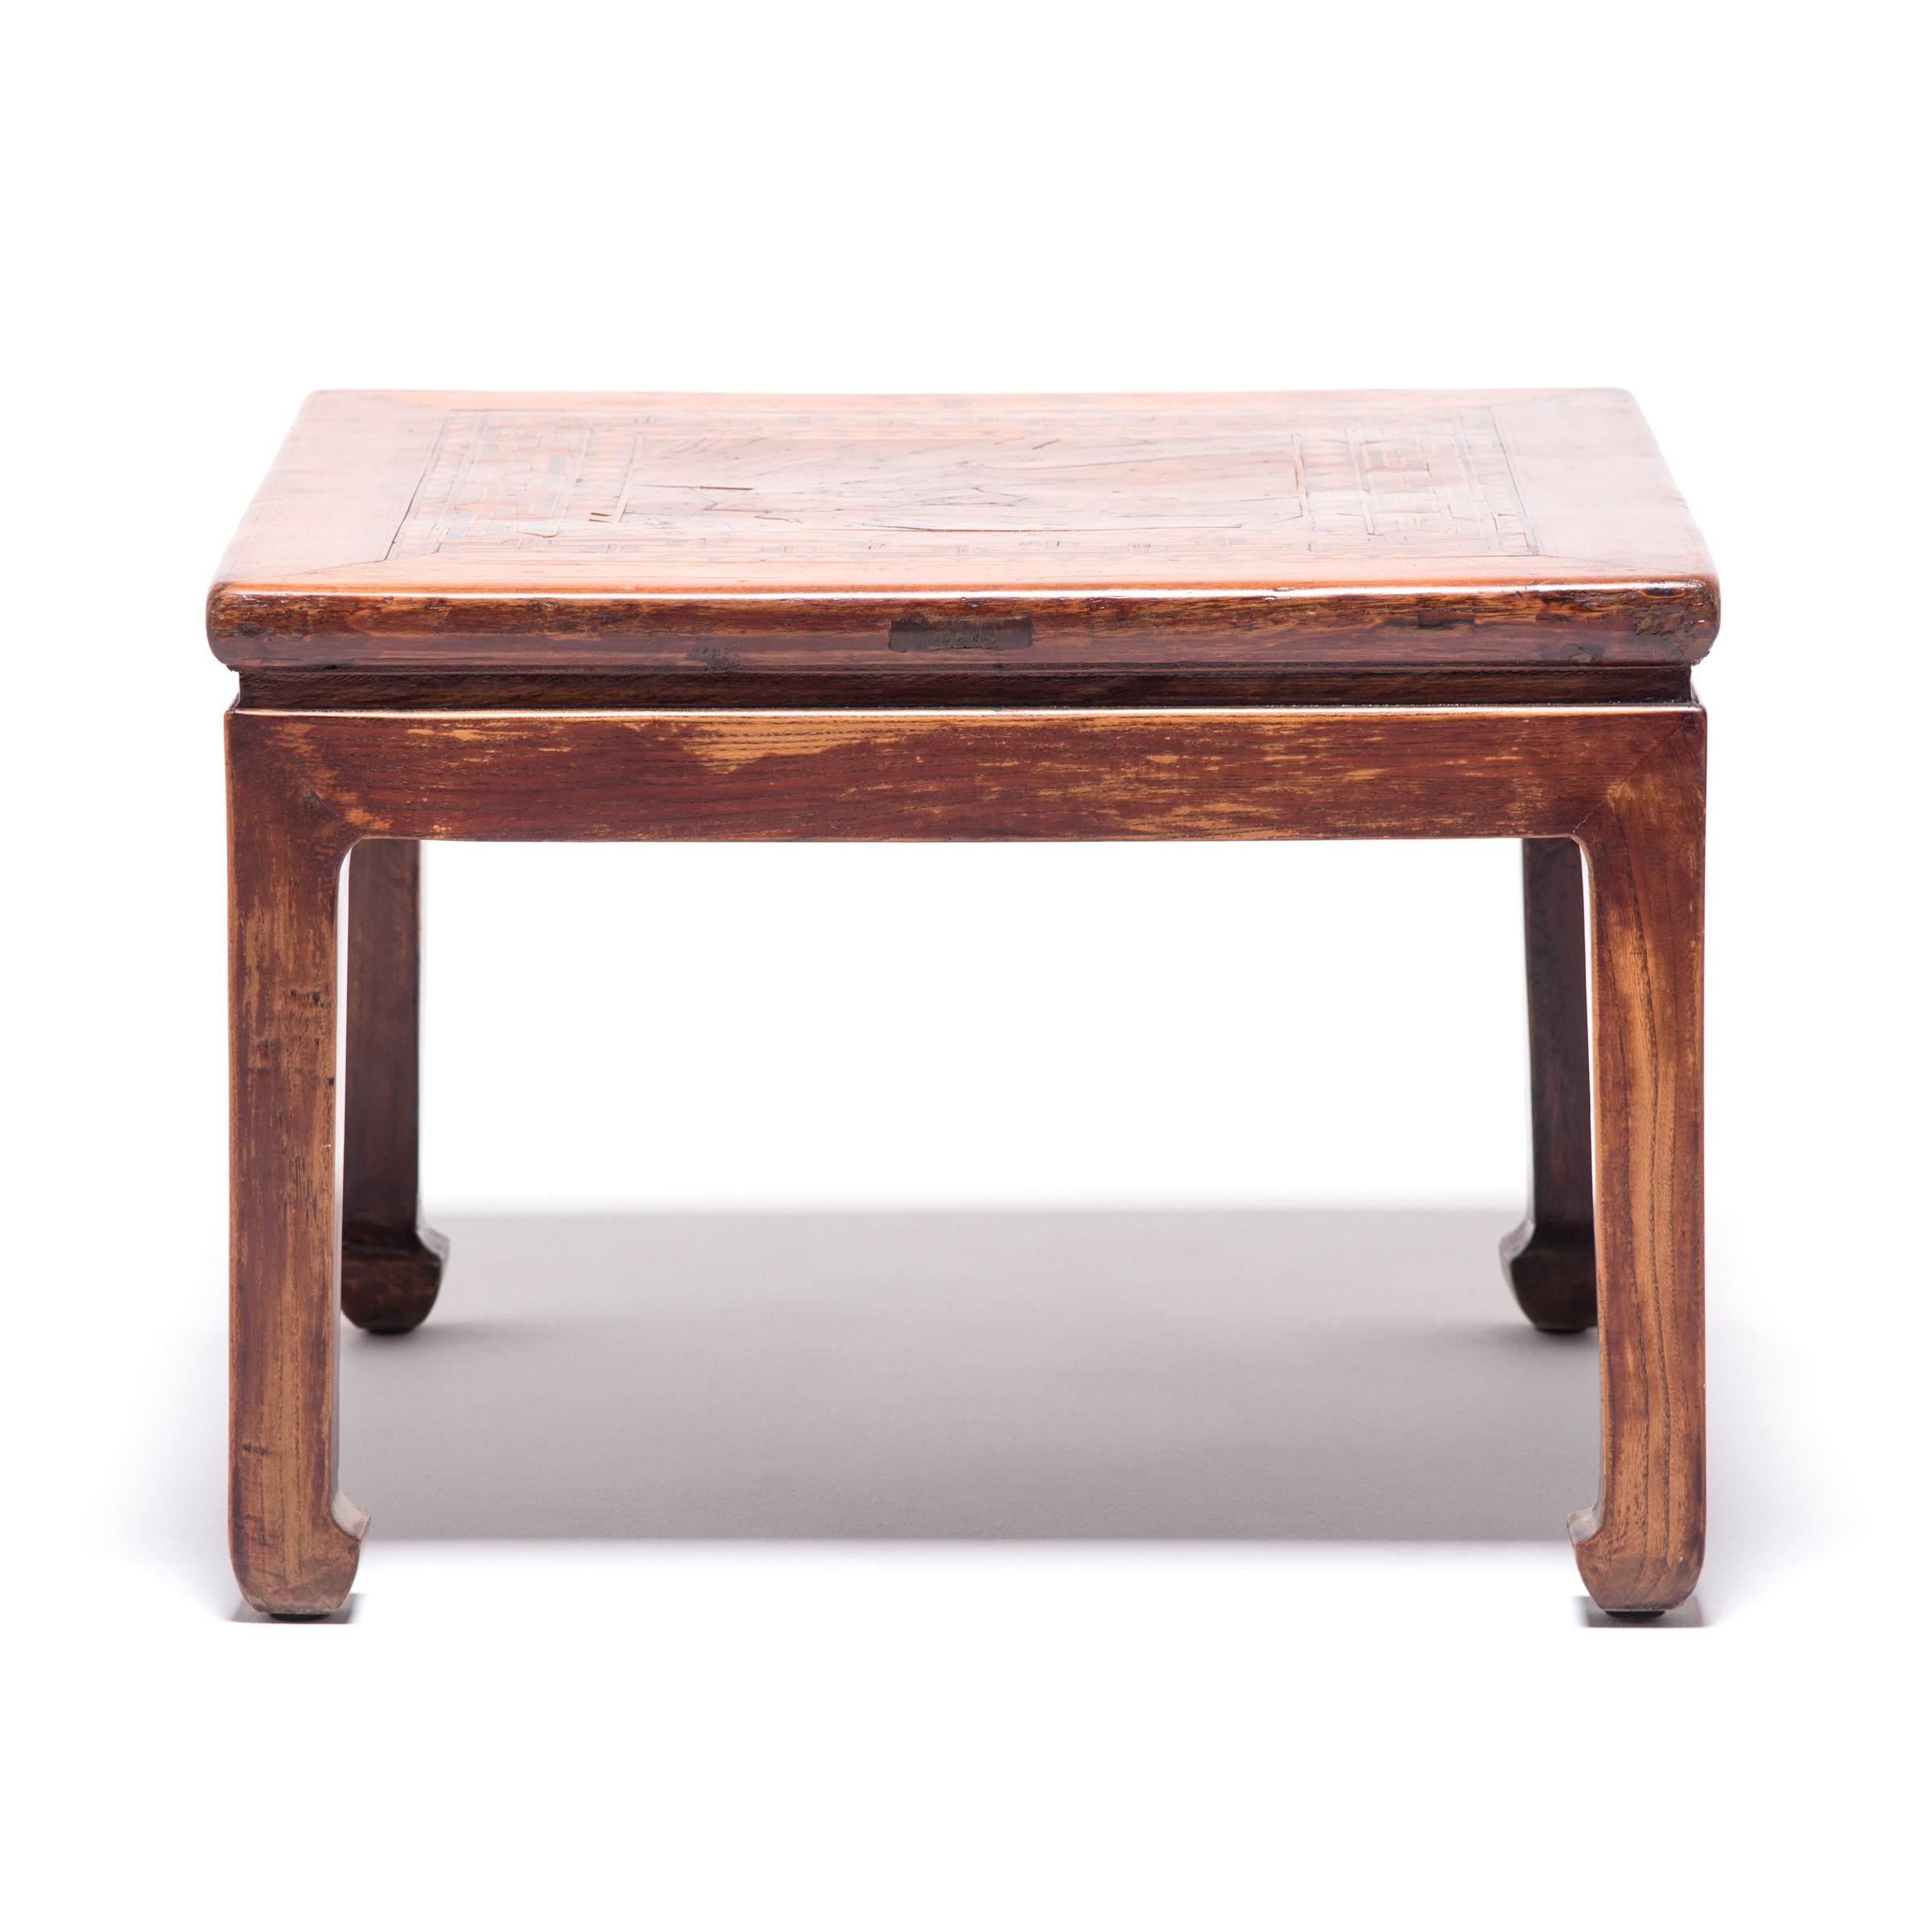 Pieced bits of wood veneer create a beautifully executed marquetry design on this special table. The intricate geometric pattern acts as a frame for a square of burled wood. Highly valued for its swirling, freeform grain, burled wood is obtained